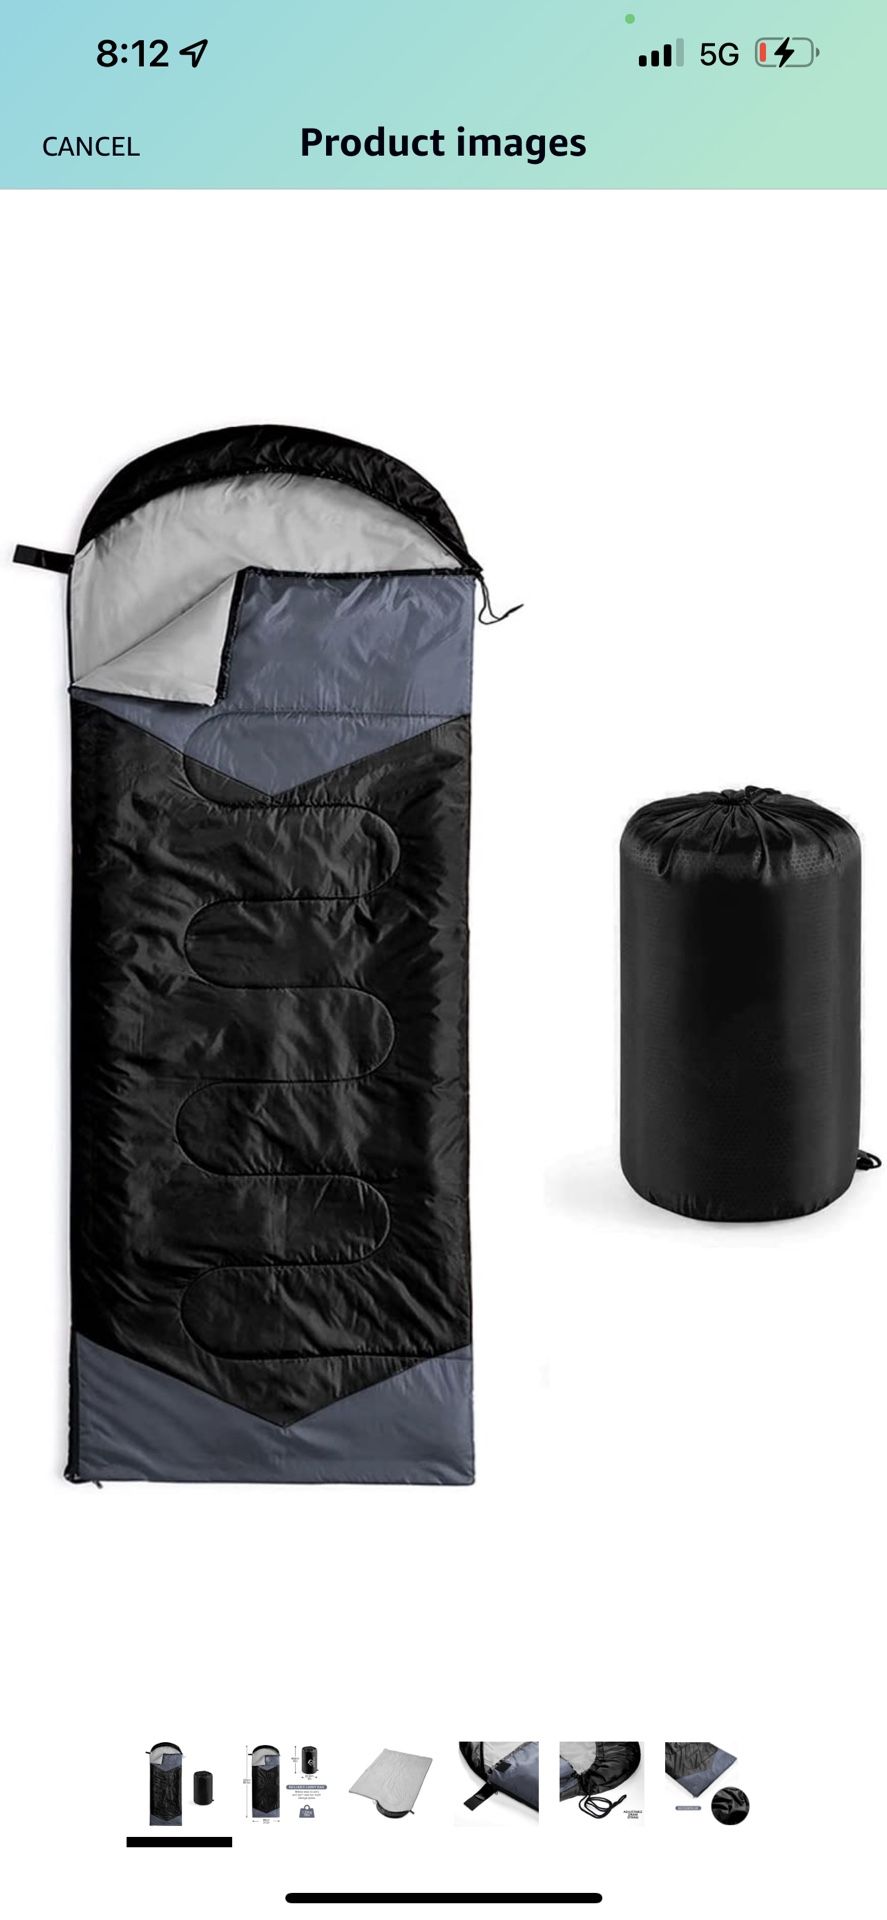 oaskys Camping Sleeping Bag - 3 Season Warm & Cool Weather - Summer, Spring, Fall, Lightweight, Waterproof for Adults & Kids - Camping Gear Equipment,